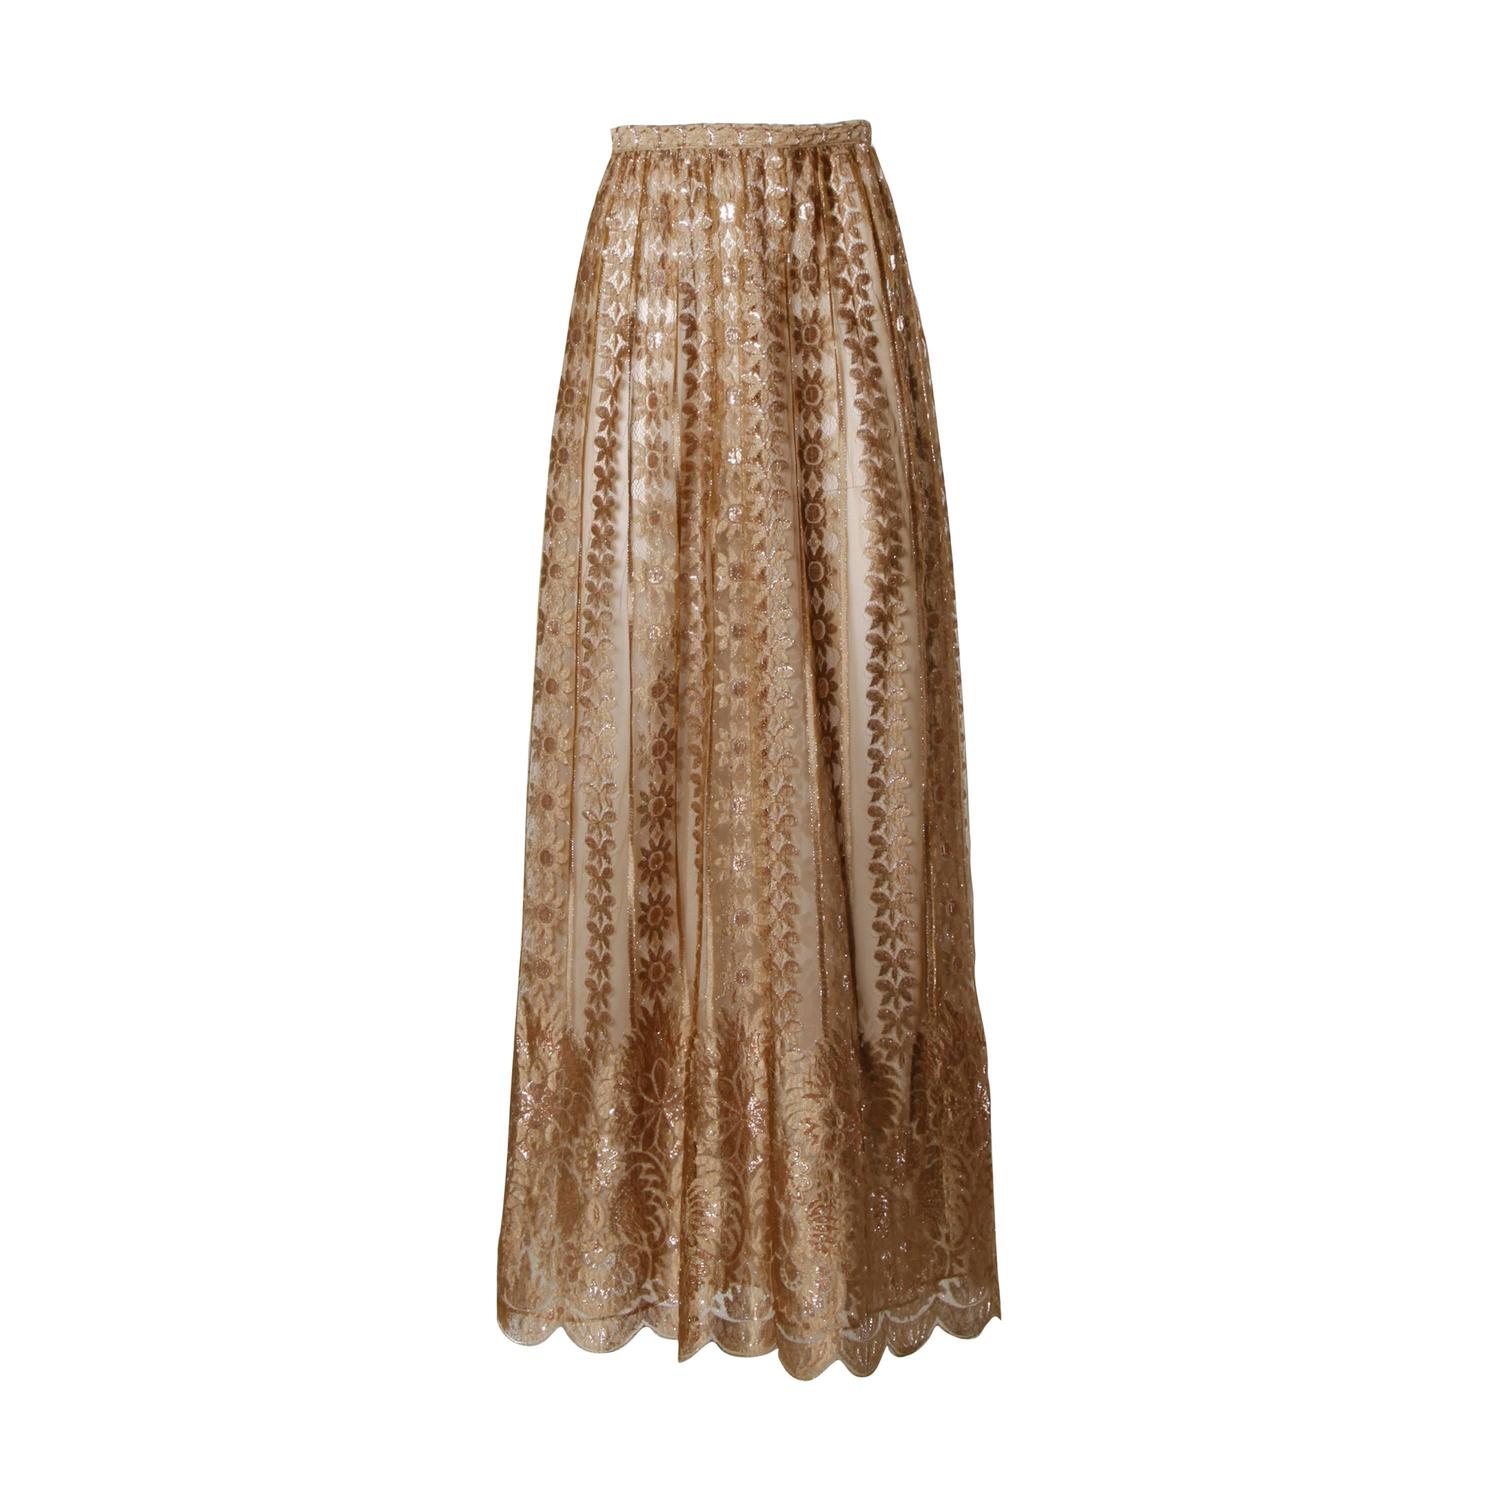 Jill Richards Vintage Scalloped Metallic Copper + Taupe Lace Maxi Skirt ...